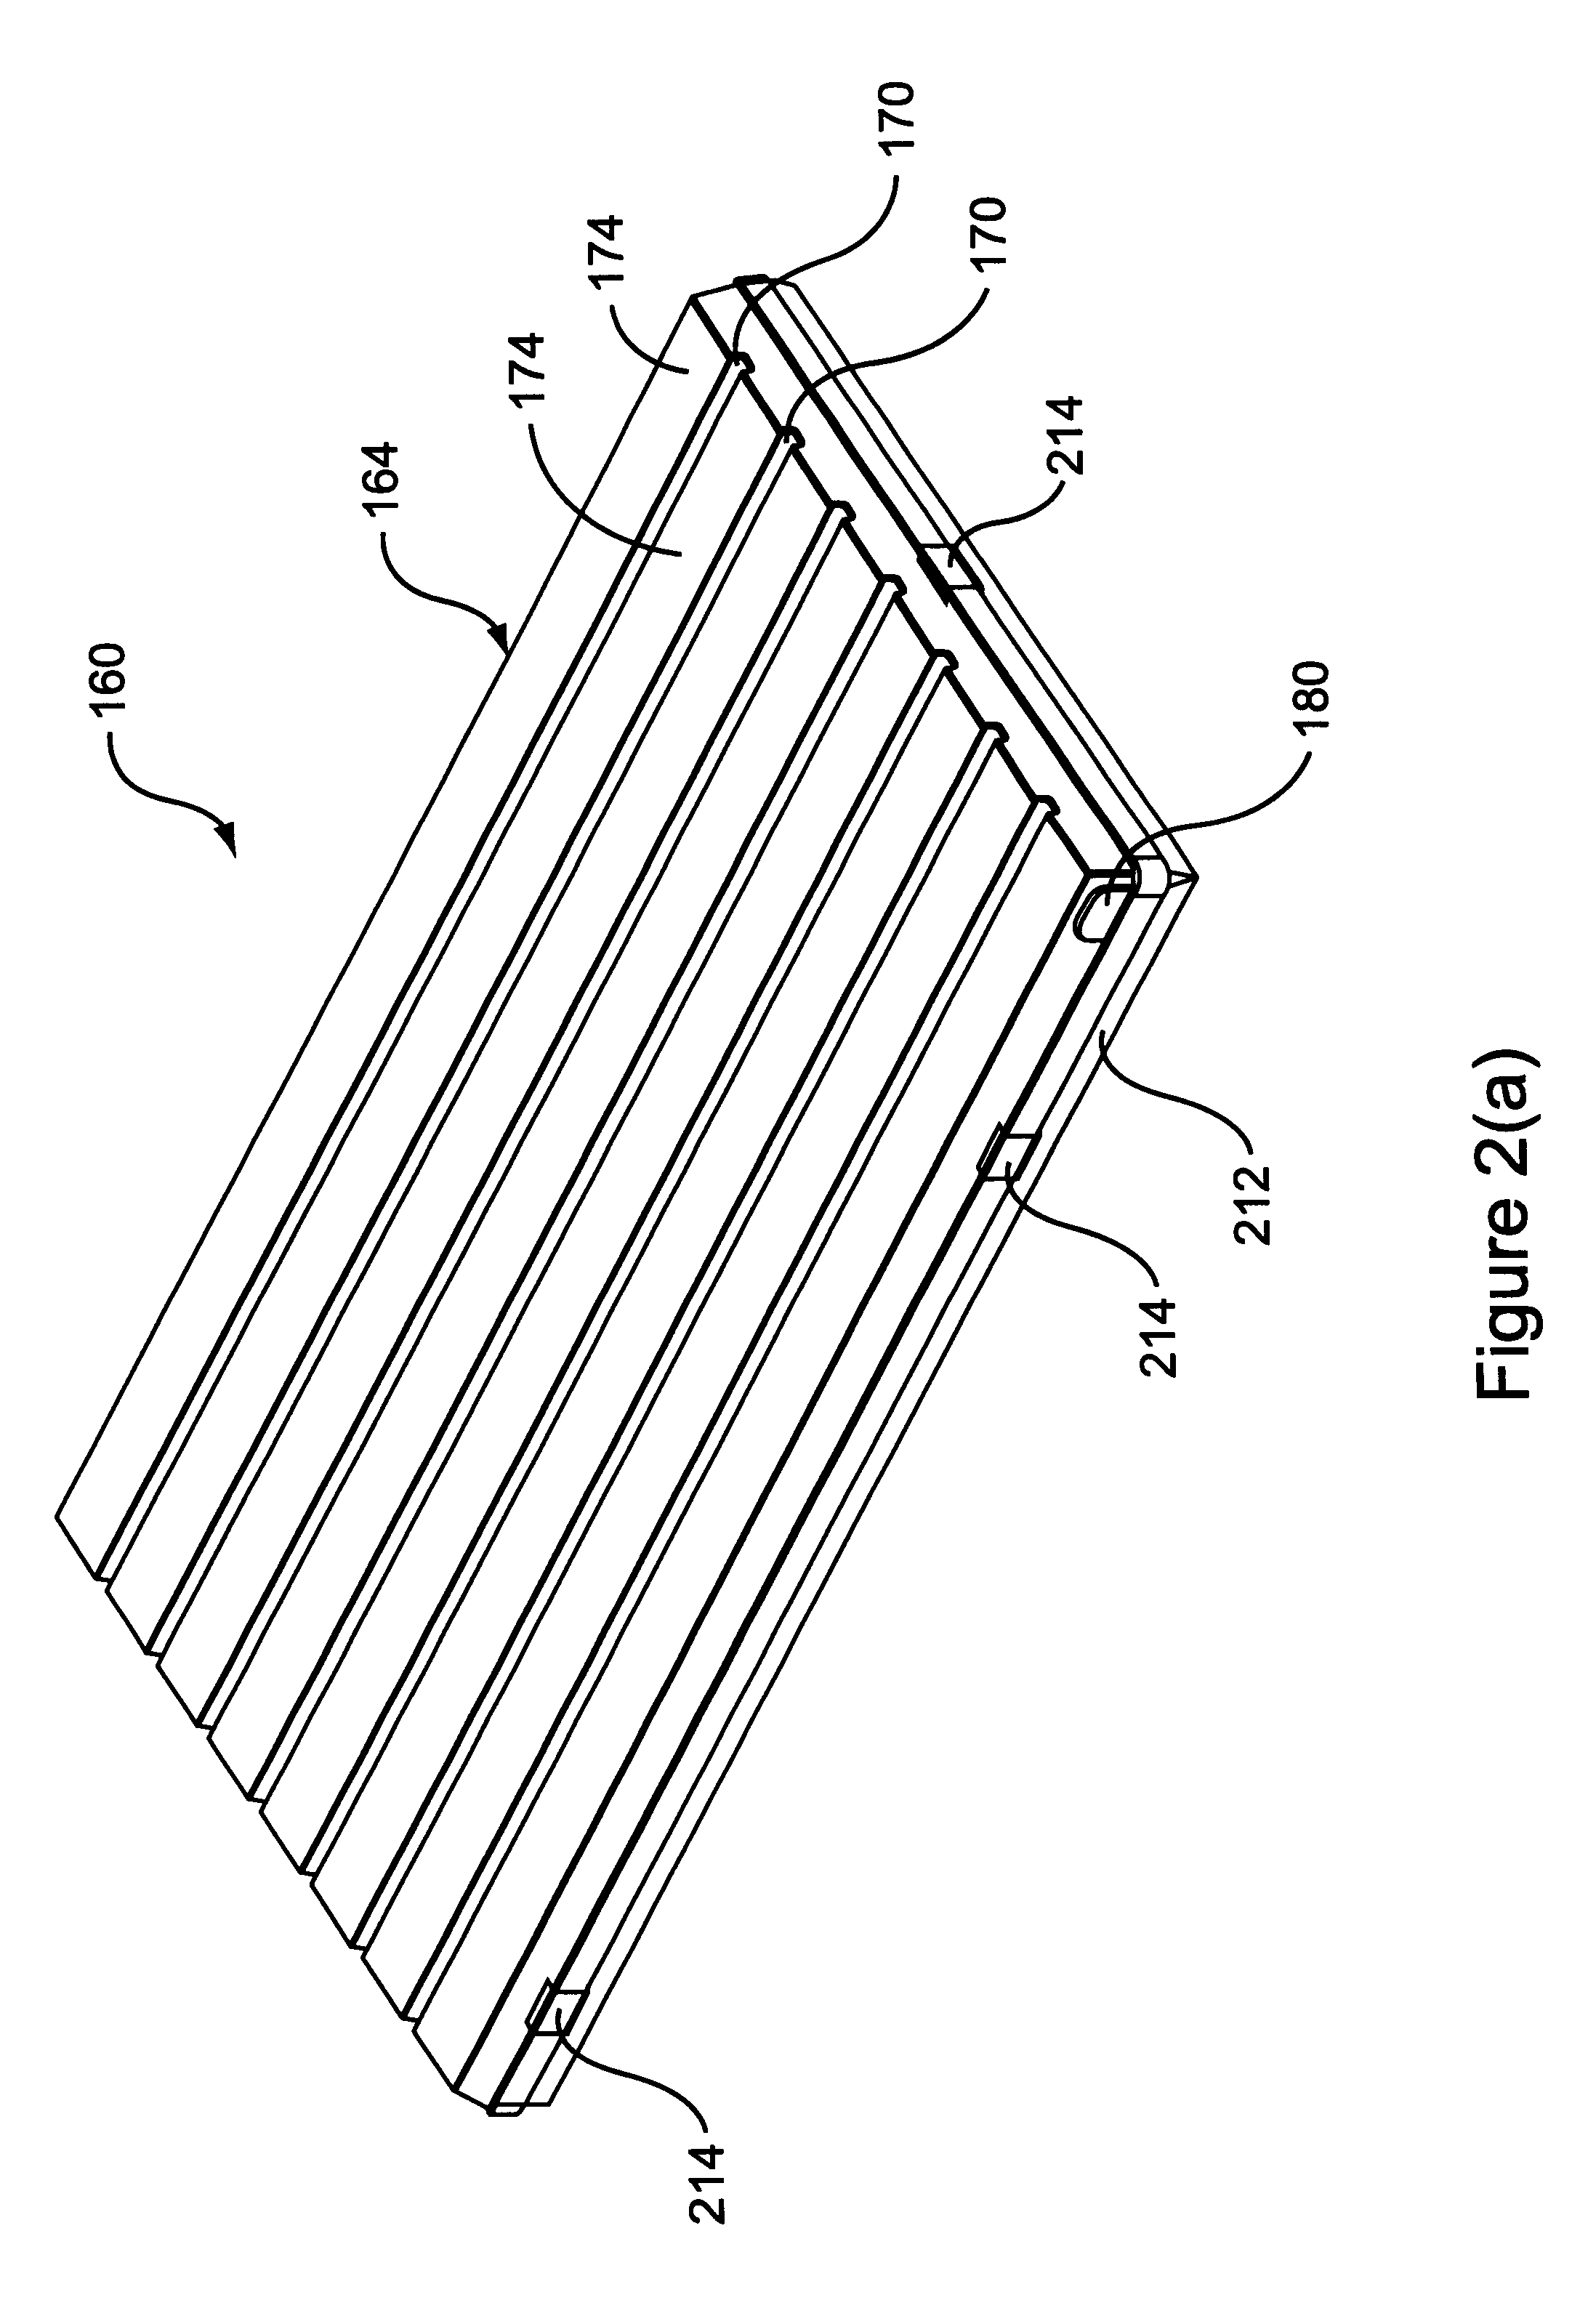 Integral collector storage system with heat exchange apparatus